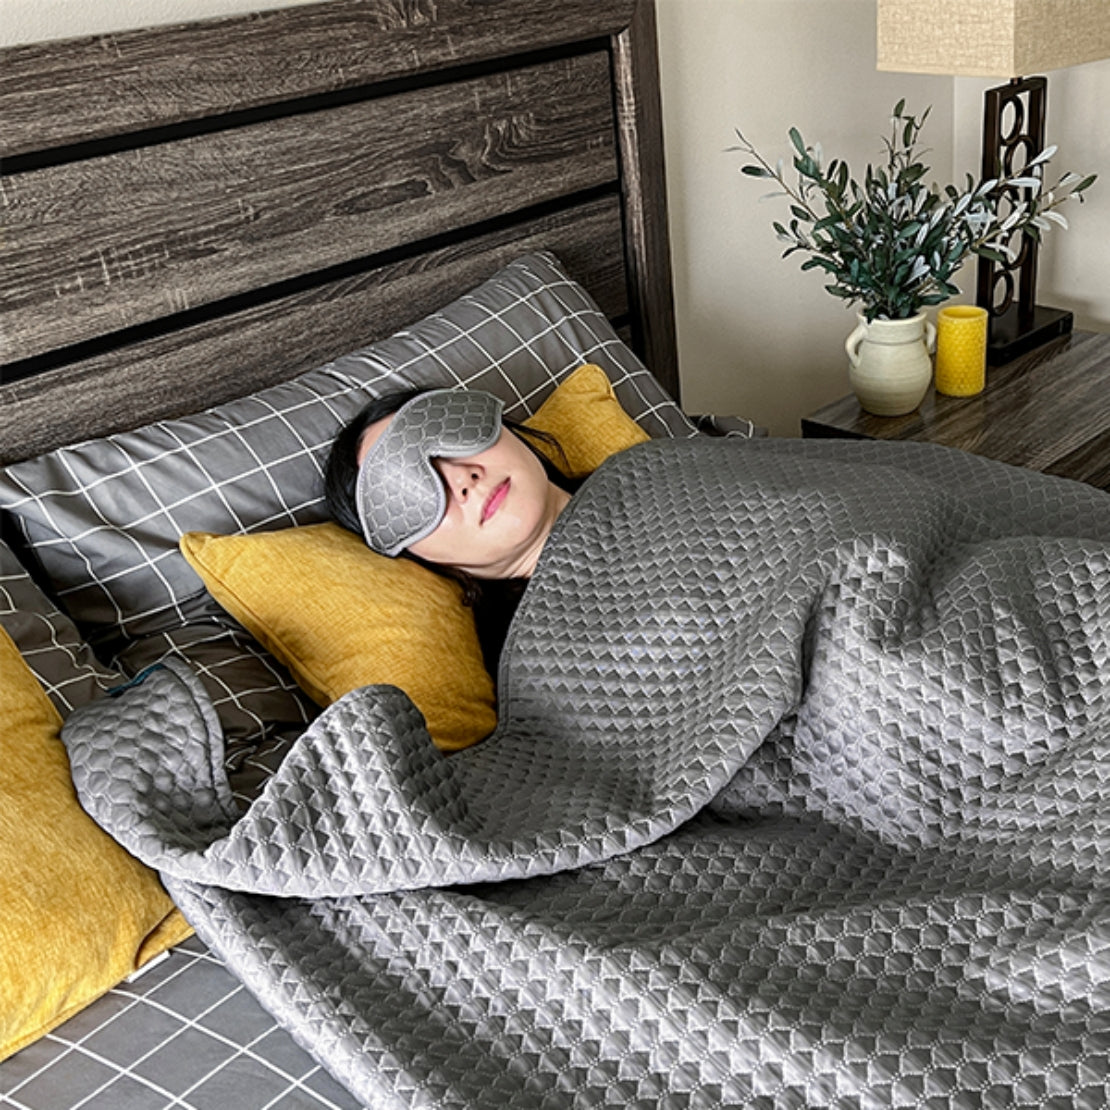 A person resting on a bed with a gray HILU Sleeping Mask covering their eyes, surrounded by yellow and gray pillows, with a wooden headboard and decorative plants in the background.